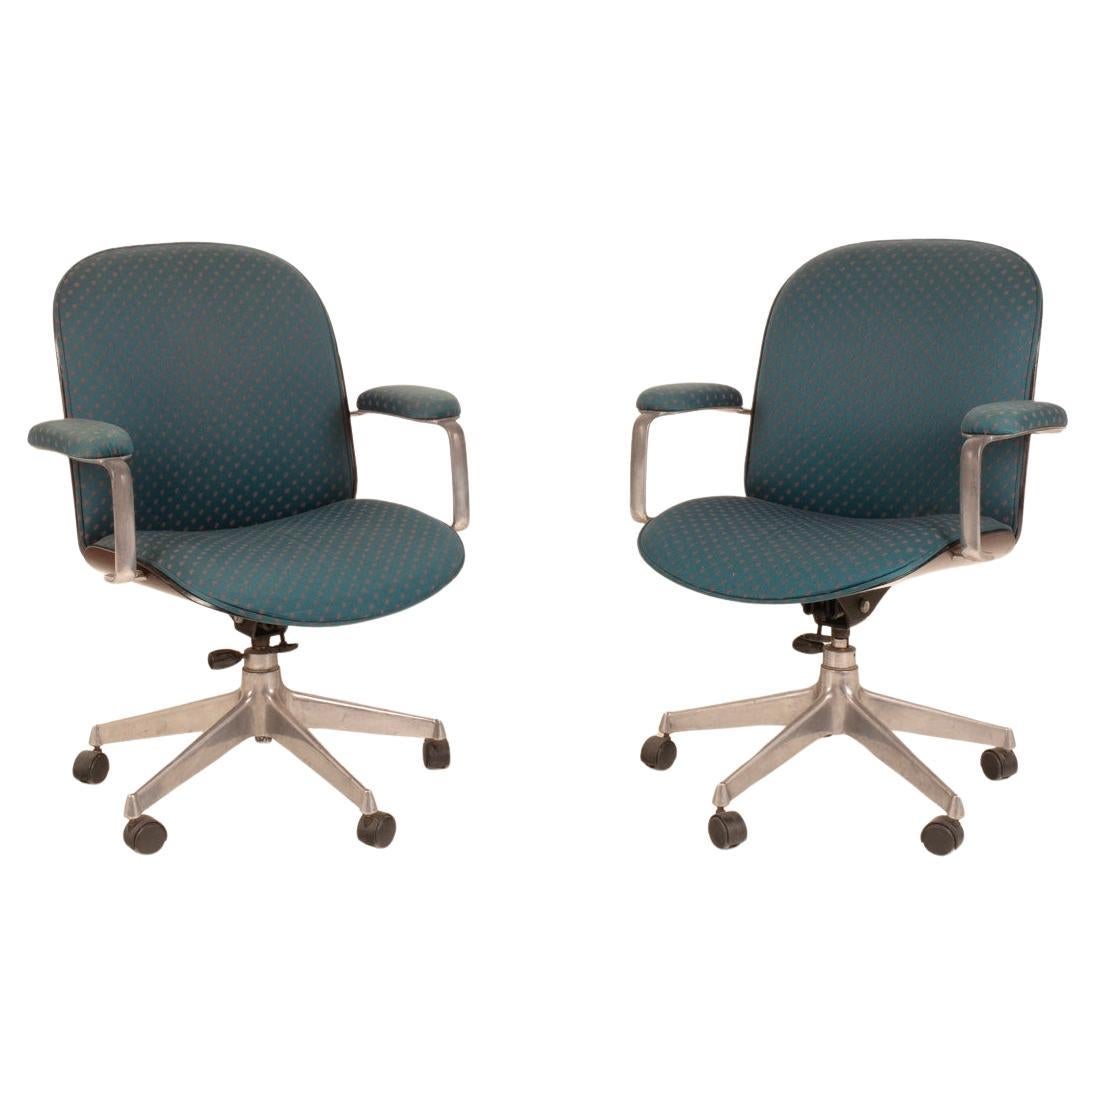 MIM Roma Office Chairs and Desk Chairs